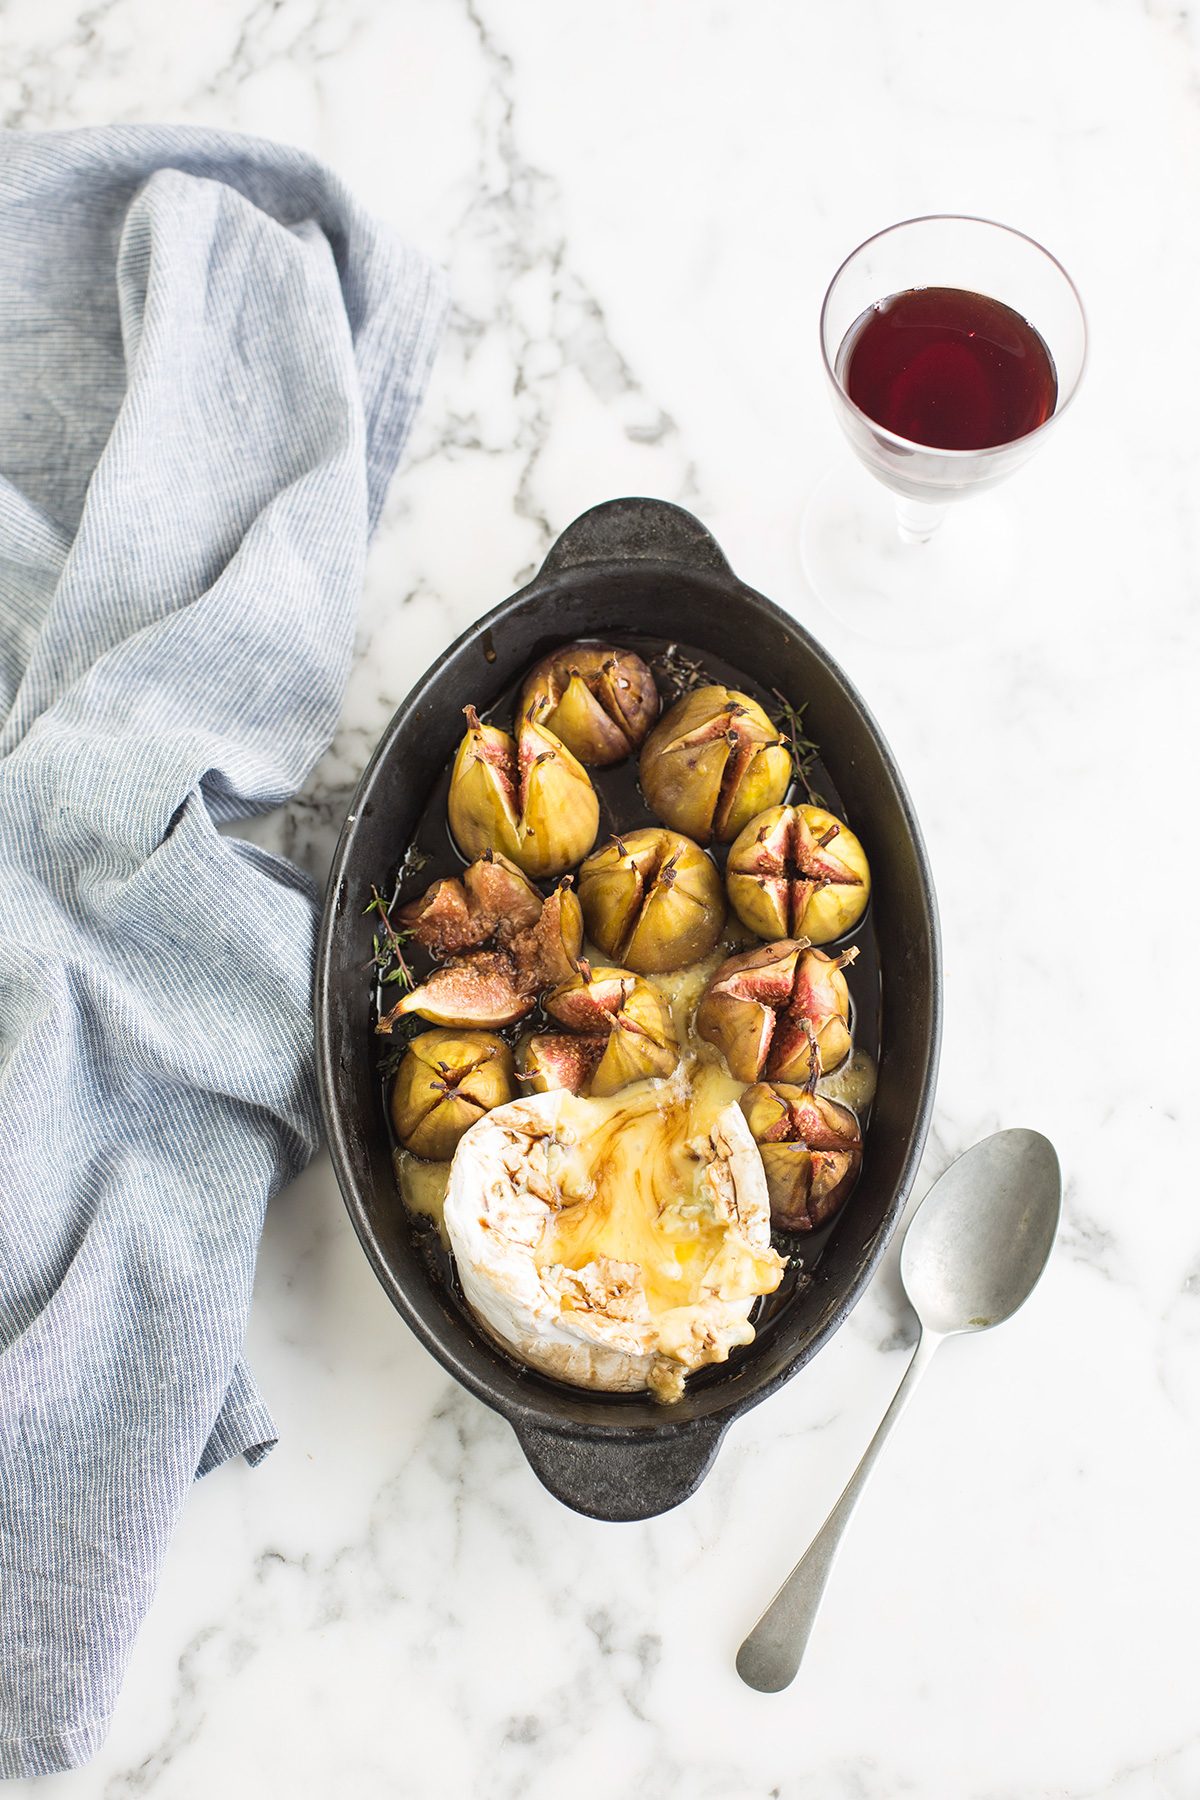 Baked Camembert & figs with a thyme & balsamic glaze recipe